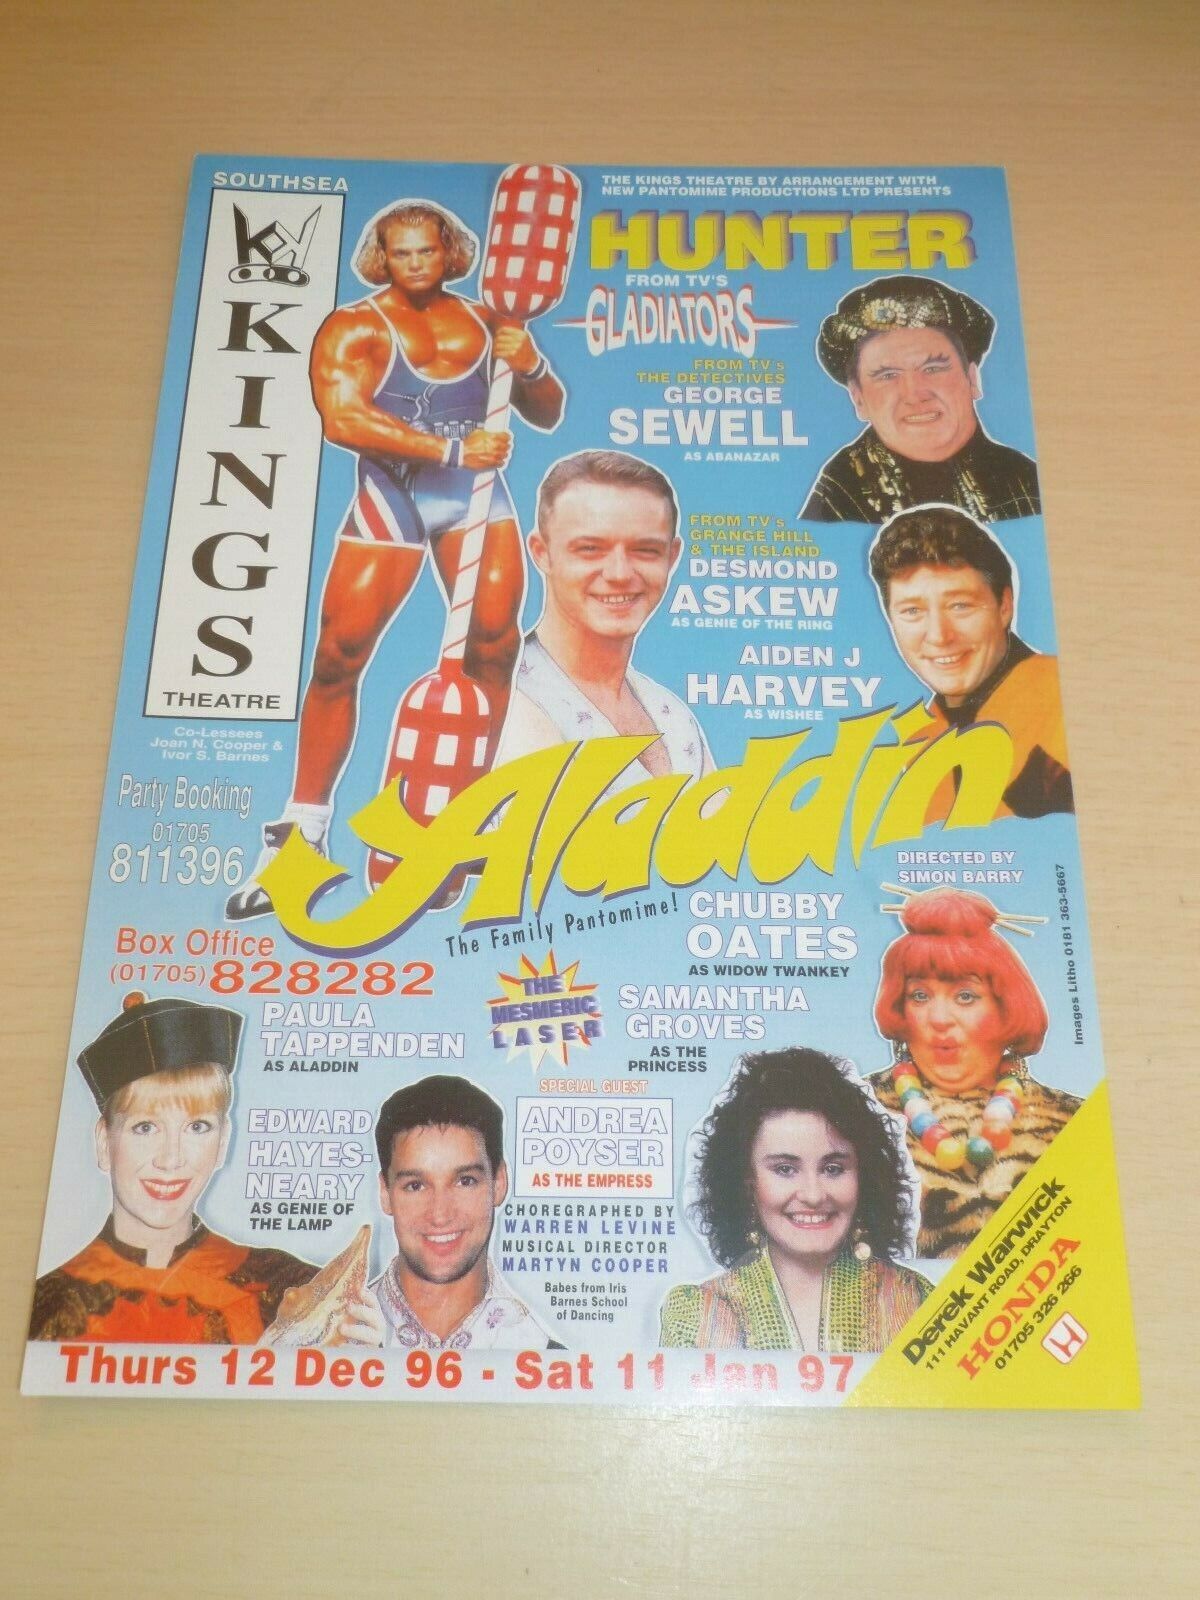 George Sewell Gladiator Hunter Chubby Oates Southsea Pantomime Flyer 1996